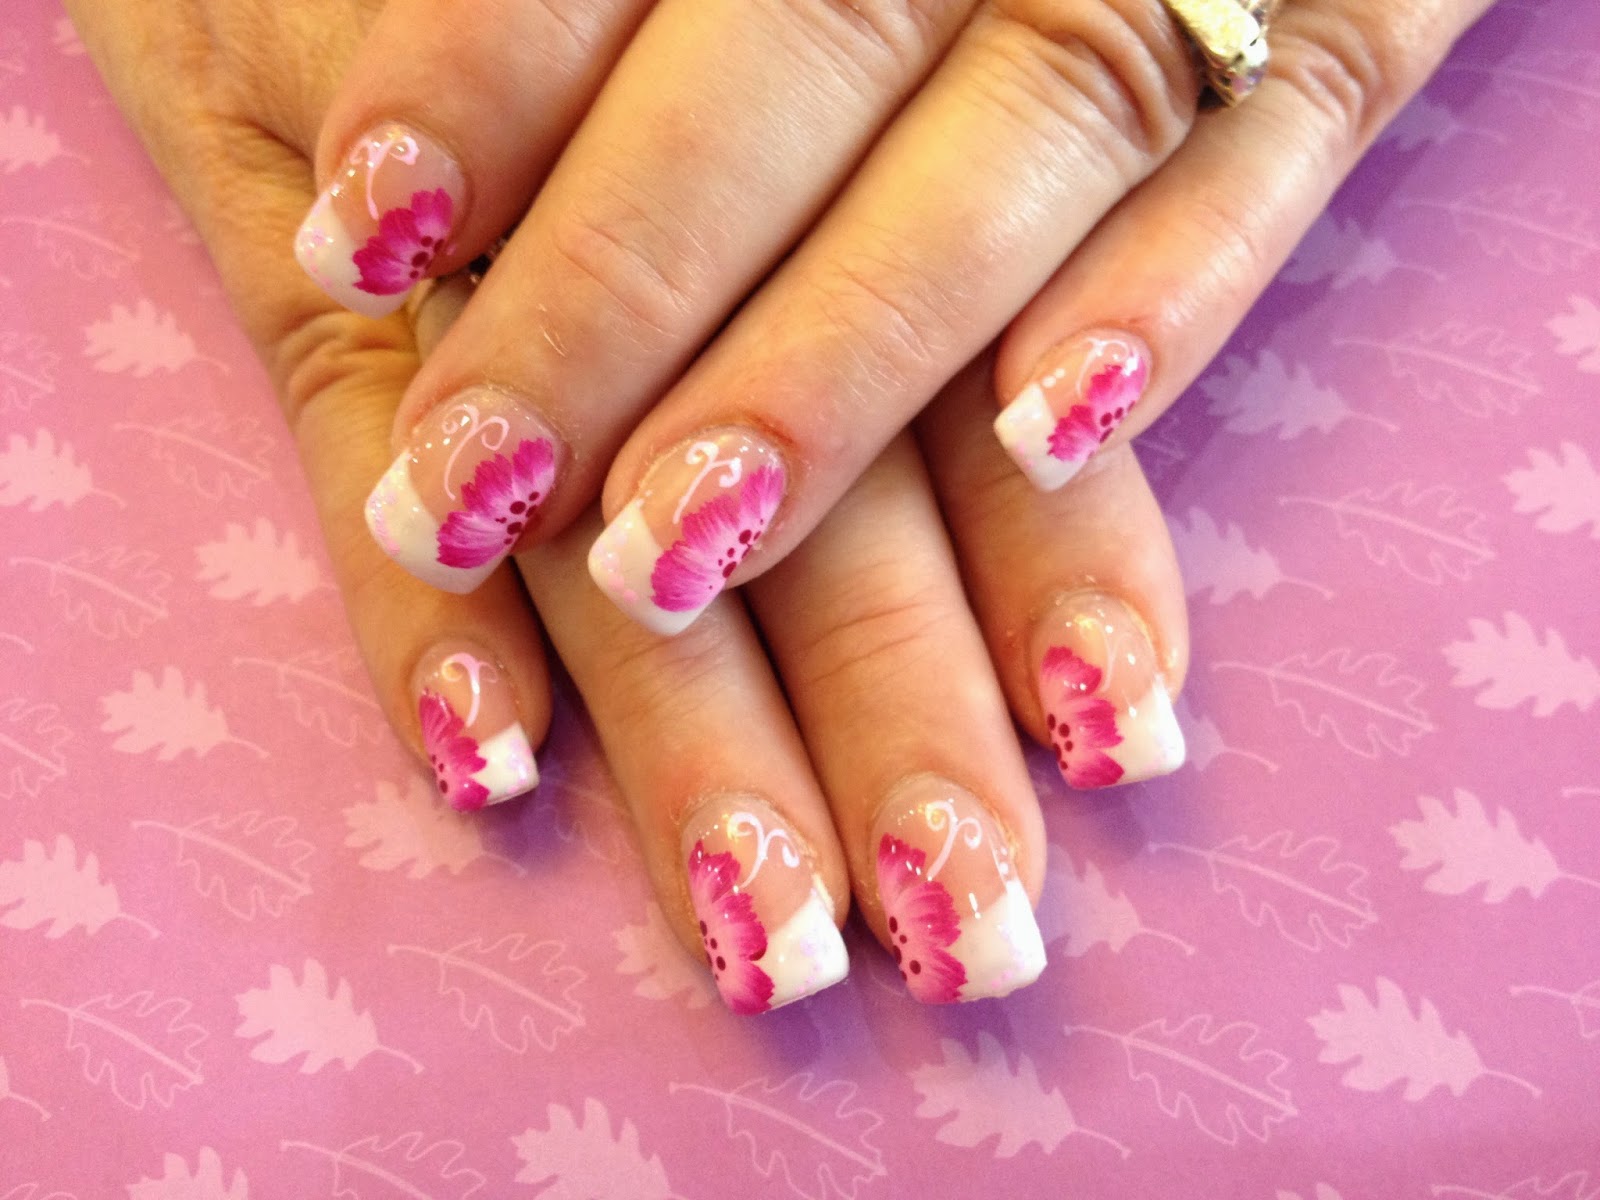 10. French Manicure Nail Art with Floral Designs - wide 6